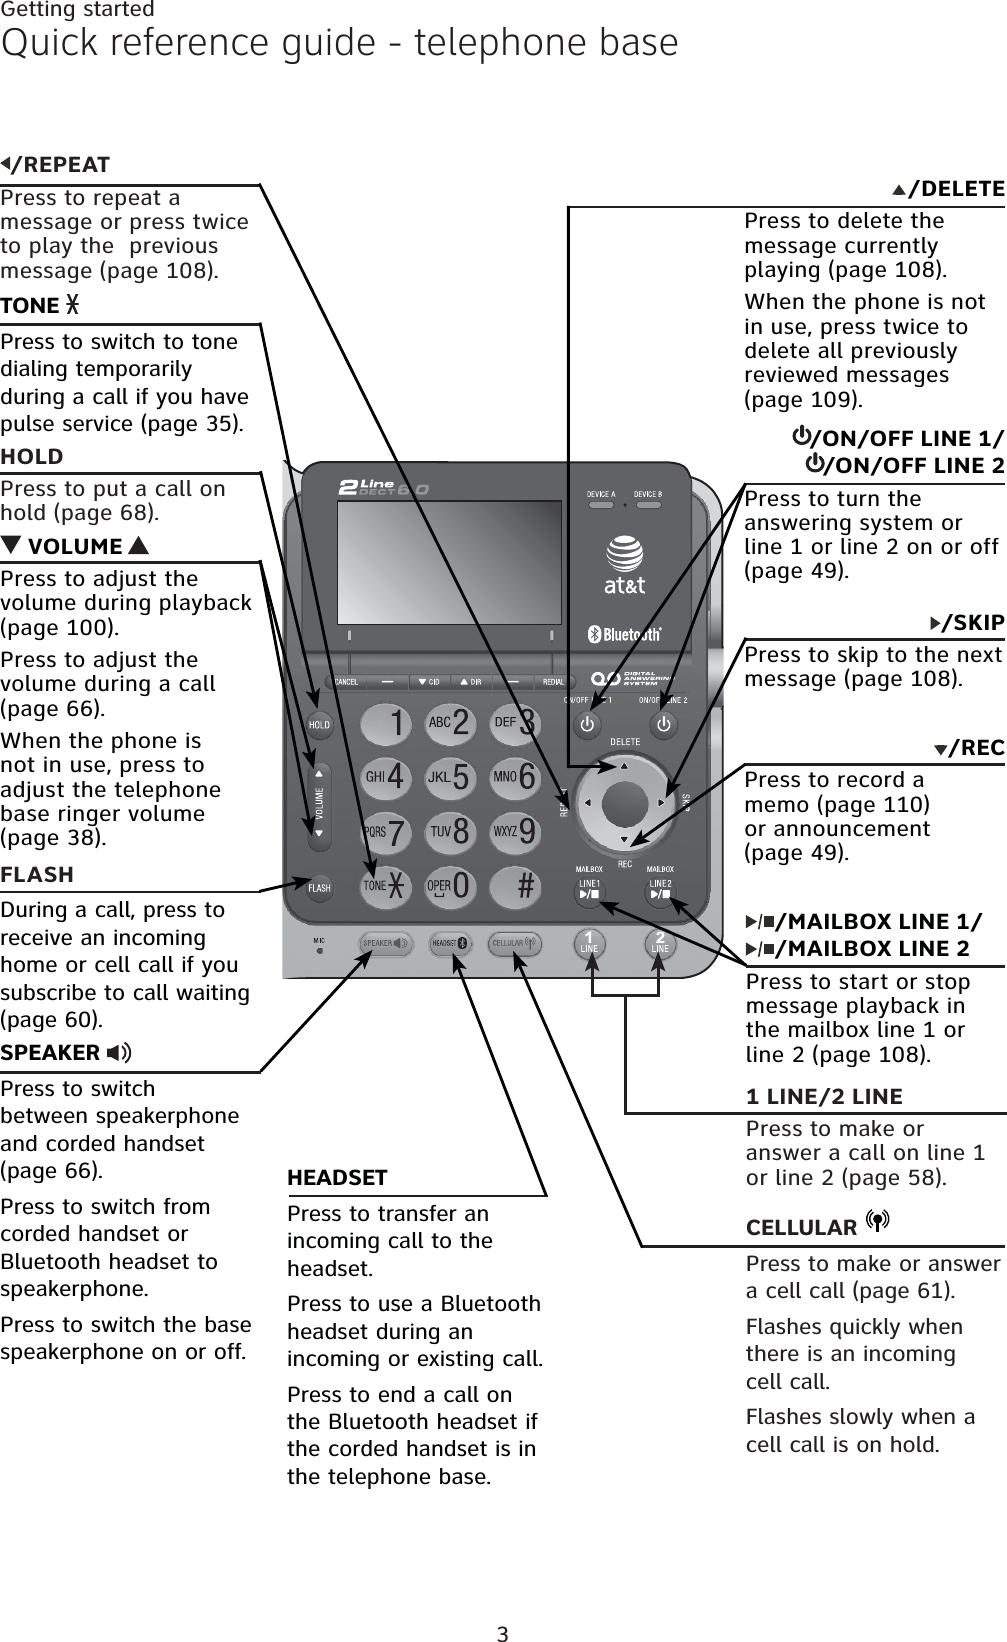 3Getting startedQuick reference guide - telephone base/DELETEPress to delete the message currently playing (page 108).When the phone is not in use, press twice to delete all previously reviewed messages (page 109)./ON/OFF LINE 1//ON/OFF LINE 2Press to turn the answering system or line 1 or line 2 on or off (page 49). VOLUME Press to adjust the volume during playback (page 100).Press to adjust the volume during a call (page 66).When the phone is not in use, press to adjust the telephone base ringer volume (page 38)./SKIPPress to skip to the next message (page 108).HOLDPress to put a call on hold (page 68).FLASHDuring a call, press to receive an incoming home or cell call if you subscribe to call waiting (page 60).SPEAKERPress to switch between speakerphone and corded handset (page 66).Press to switch from corded handset or Bluetooth headset to speakerphone.Press to switch the base speakerphone on or off.HEADSETPress to transfer an incoming call to the headset.Press to use a Bluetooth headset during an incoming or existing call.Press to end a call on the Bluetooth headset if the corded handset is in the telephone base.CELLULAR Press to make or answer a cell call (page 61).Flashes quickly when there is an incoming cell call.Flashes slowly when a cell call is on hold.1 LINE/2 LINE Press to make or answer a call on line 1 or line 2 (page 58)./MAILBOX LINE 1//MAILBOX LINE 2Press to start or stop message playback in the mailbox line 1 or line 2 (page 108)./RECPress to record a memo (page 110)or announcement (page 49)./REPEATPress to repeat a message or press twice to play the  previous message (page 108).TONE Press to switch to tone dialing temporarily during a call if you have pulse service (page 35).